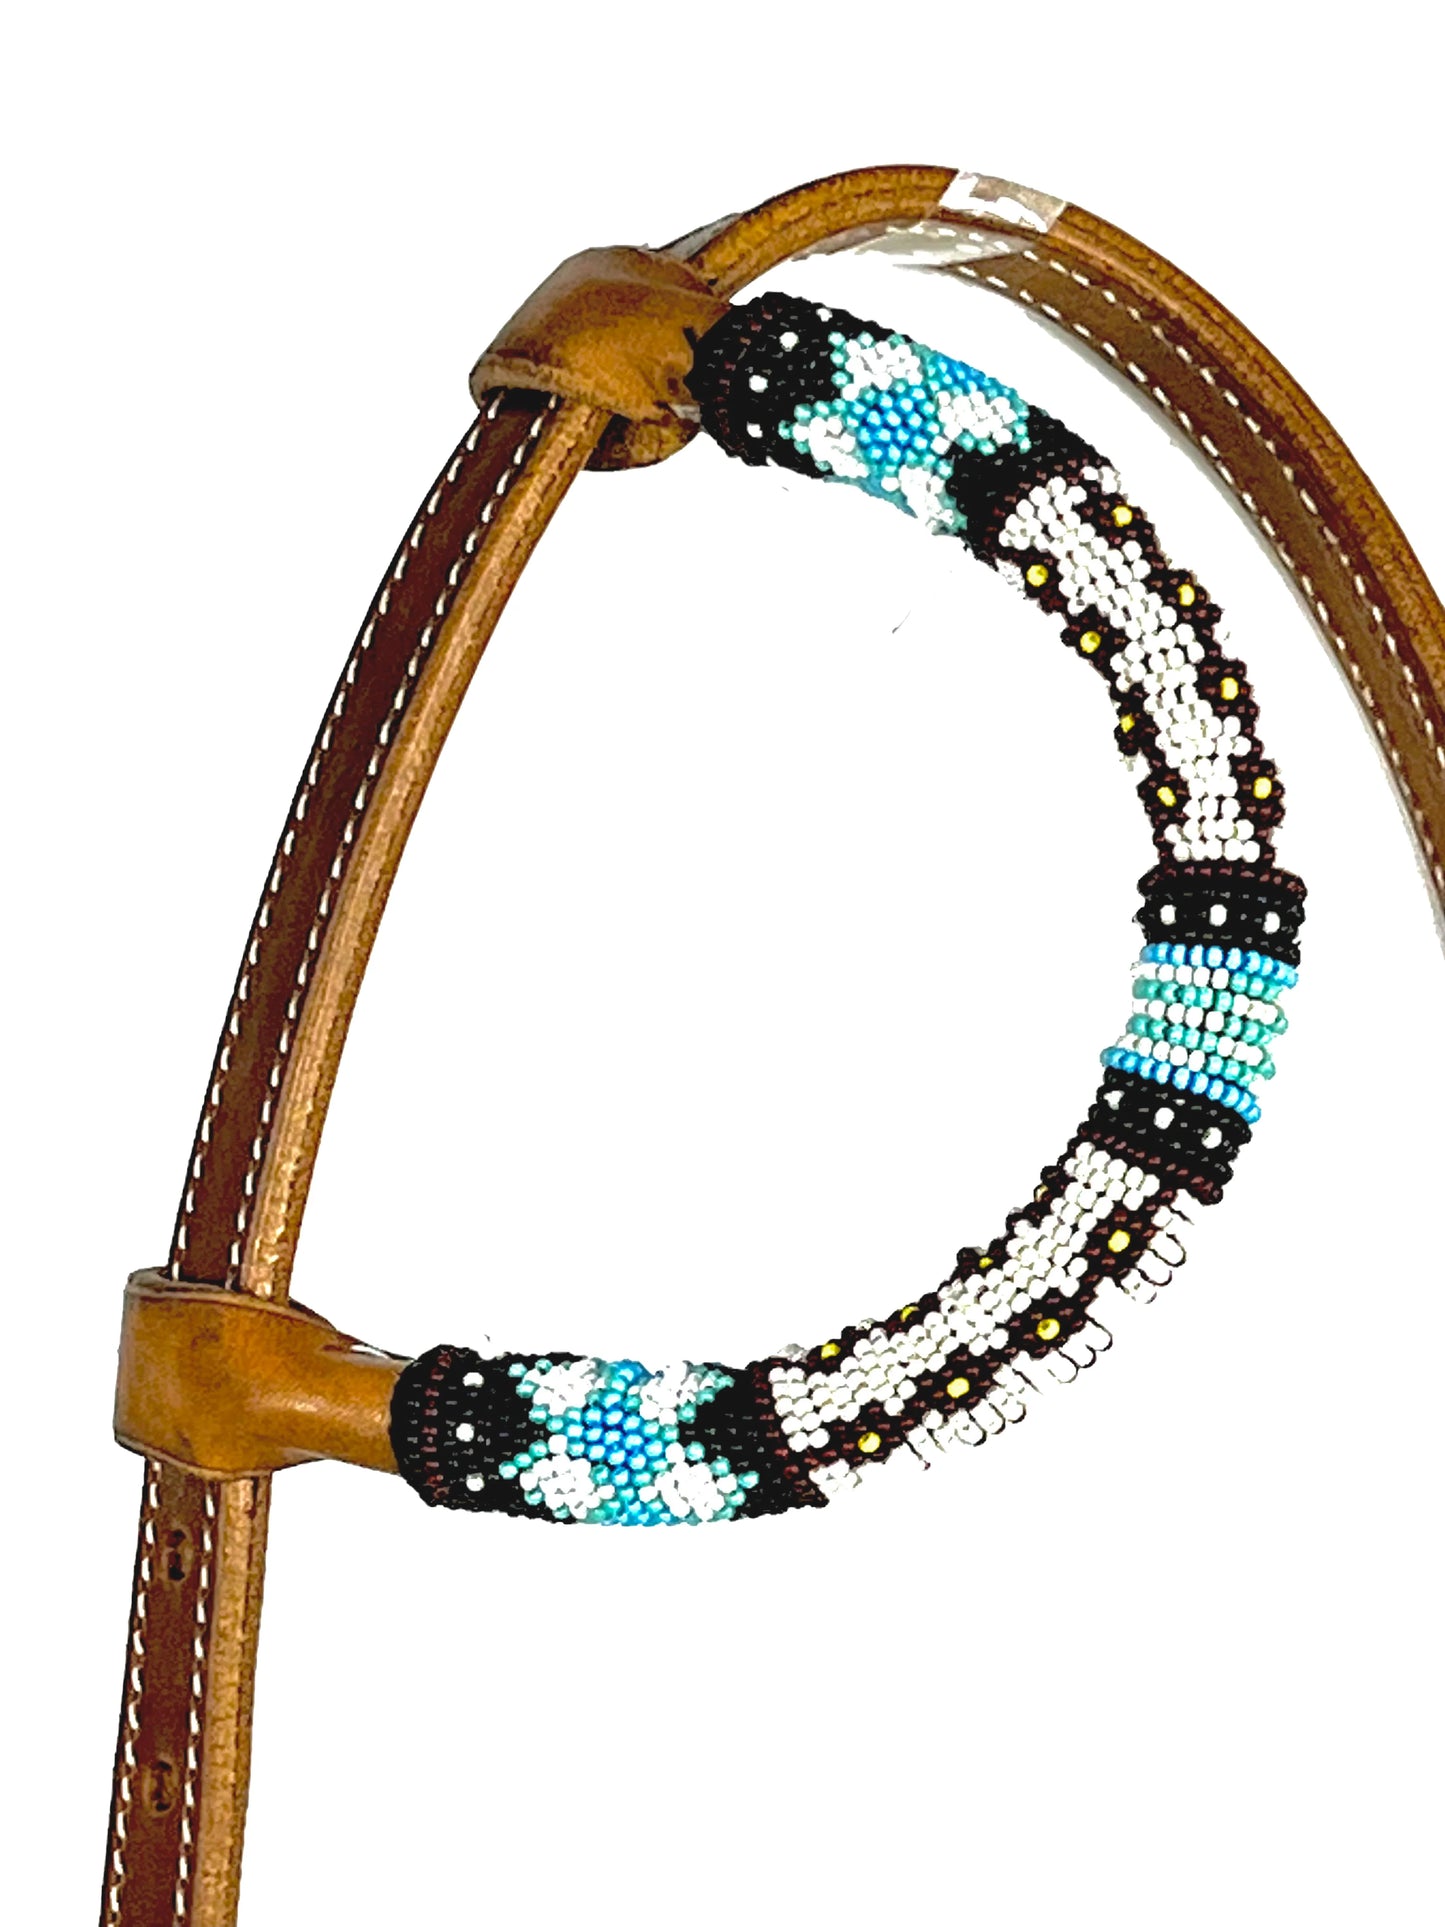 Ezy Ride Bridle One Ear with Blue Beaded Accent - NE-AC-141